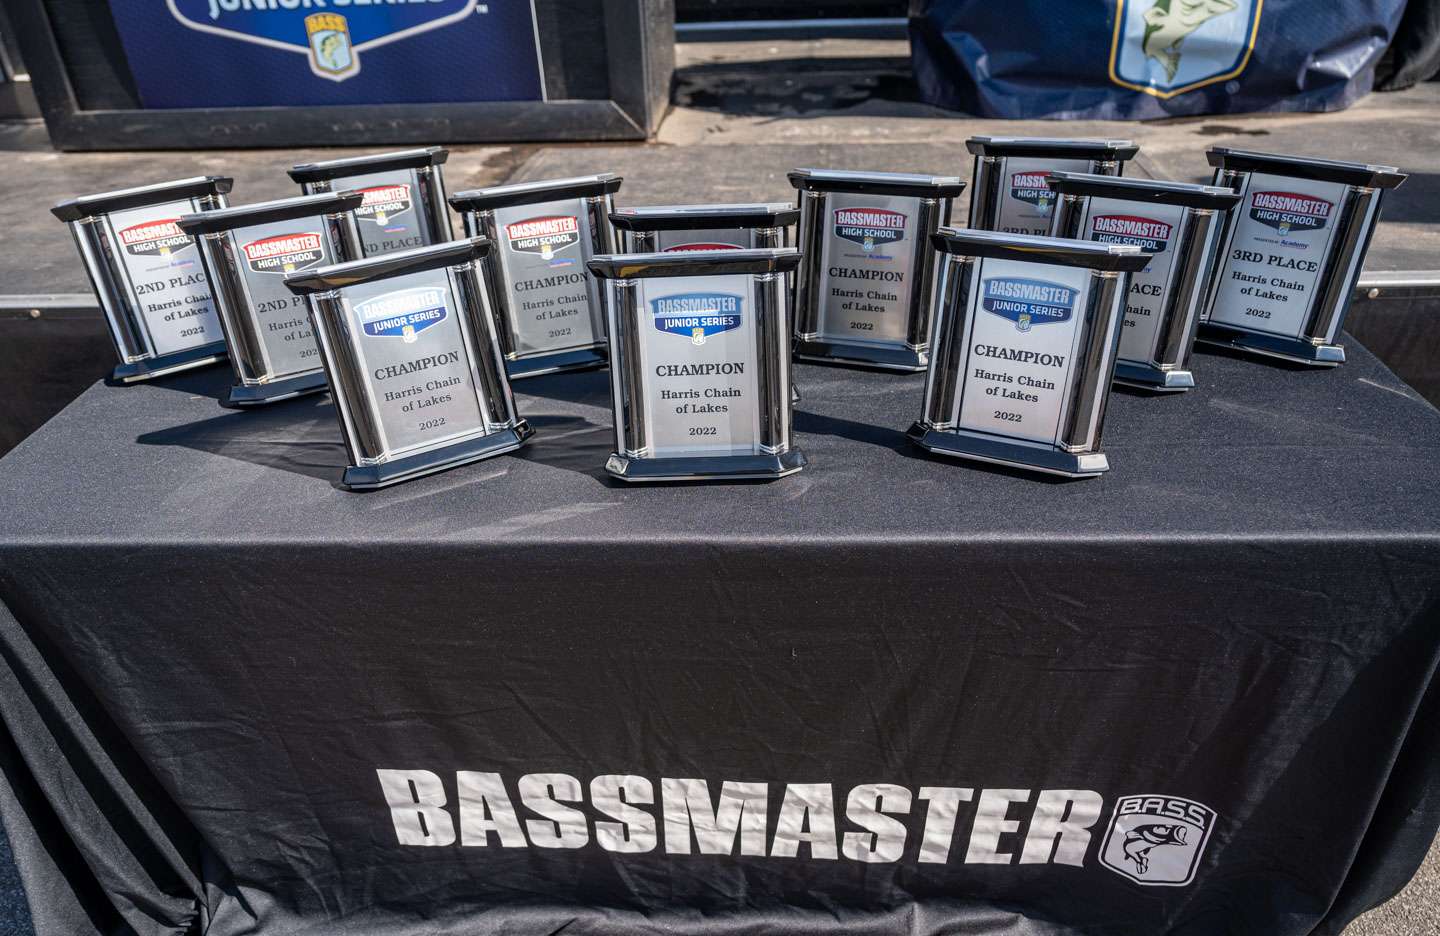 Check out all of the action from the Bassmaster Junior Series at Harris Chain of Lakes weigh-in.